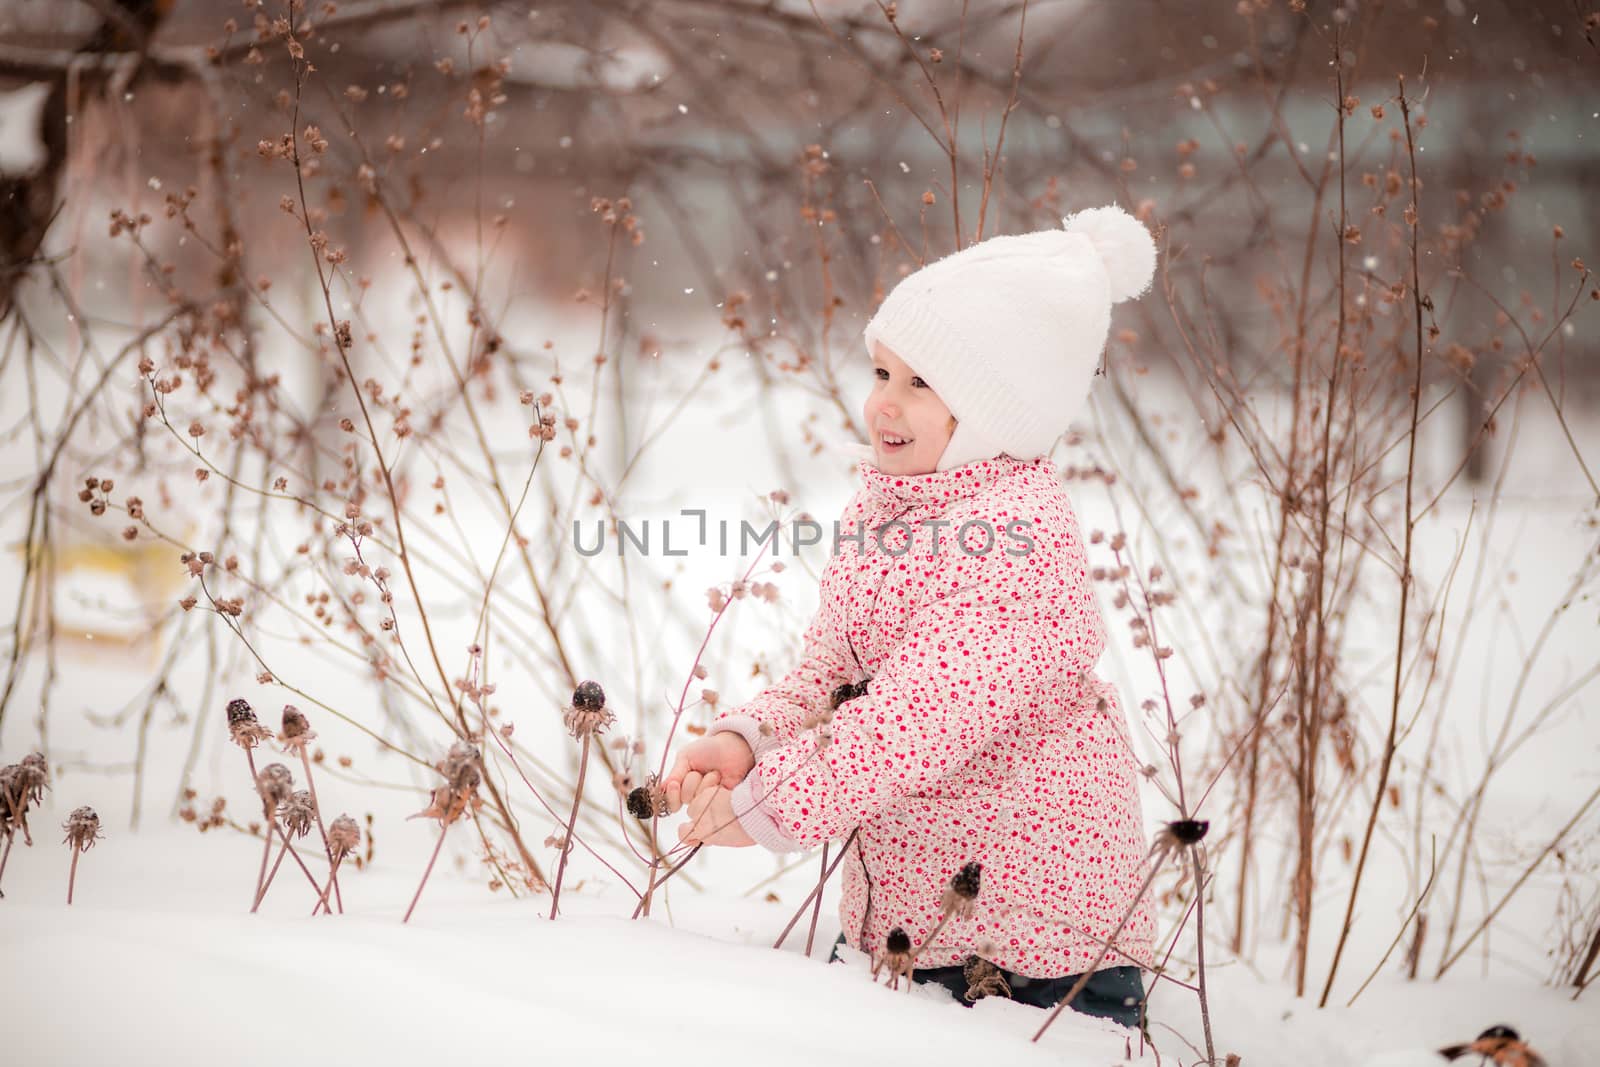 A little girl sits in the snow and picks dried plants on sunny winter day